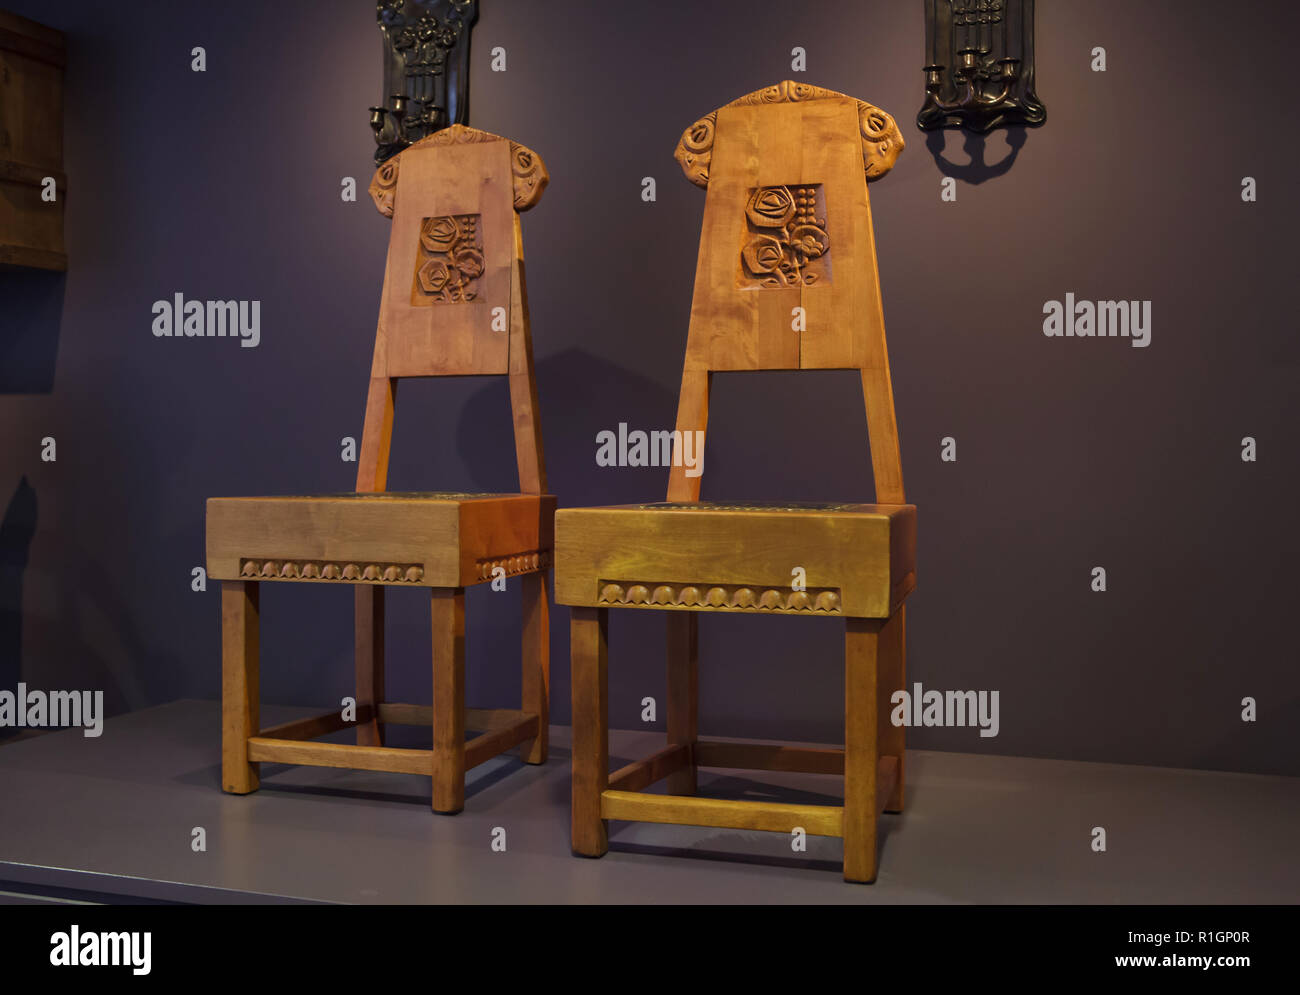 Wooden chairs designed by Russian artist Sergey Malyutin in the Talashkino Workshop (ca. 1900) on display in the Musée d'Orsay in Paris, France. Stock Photo